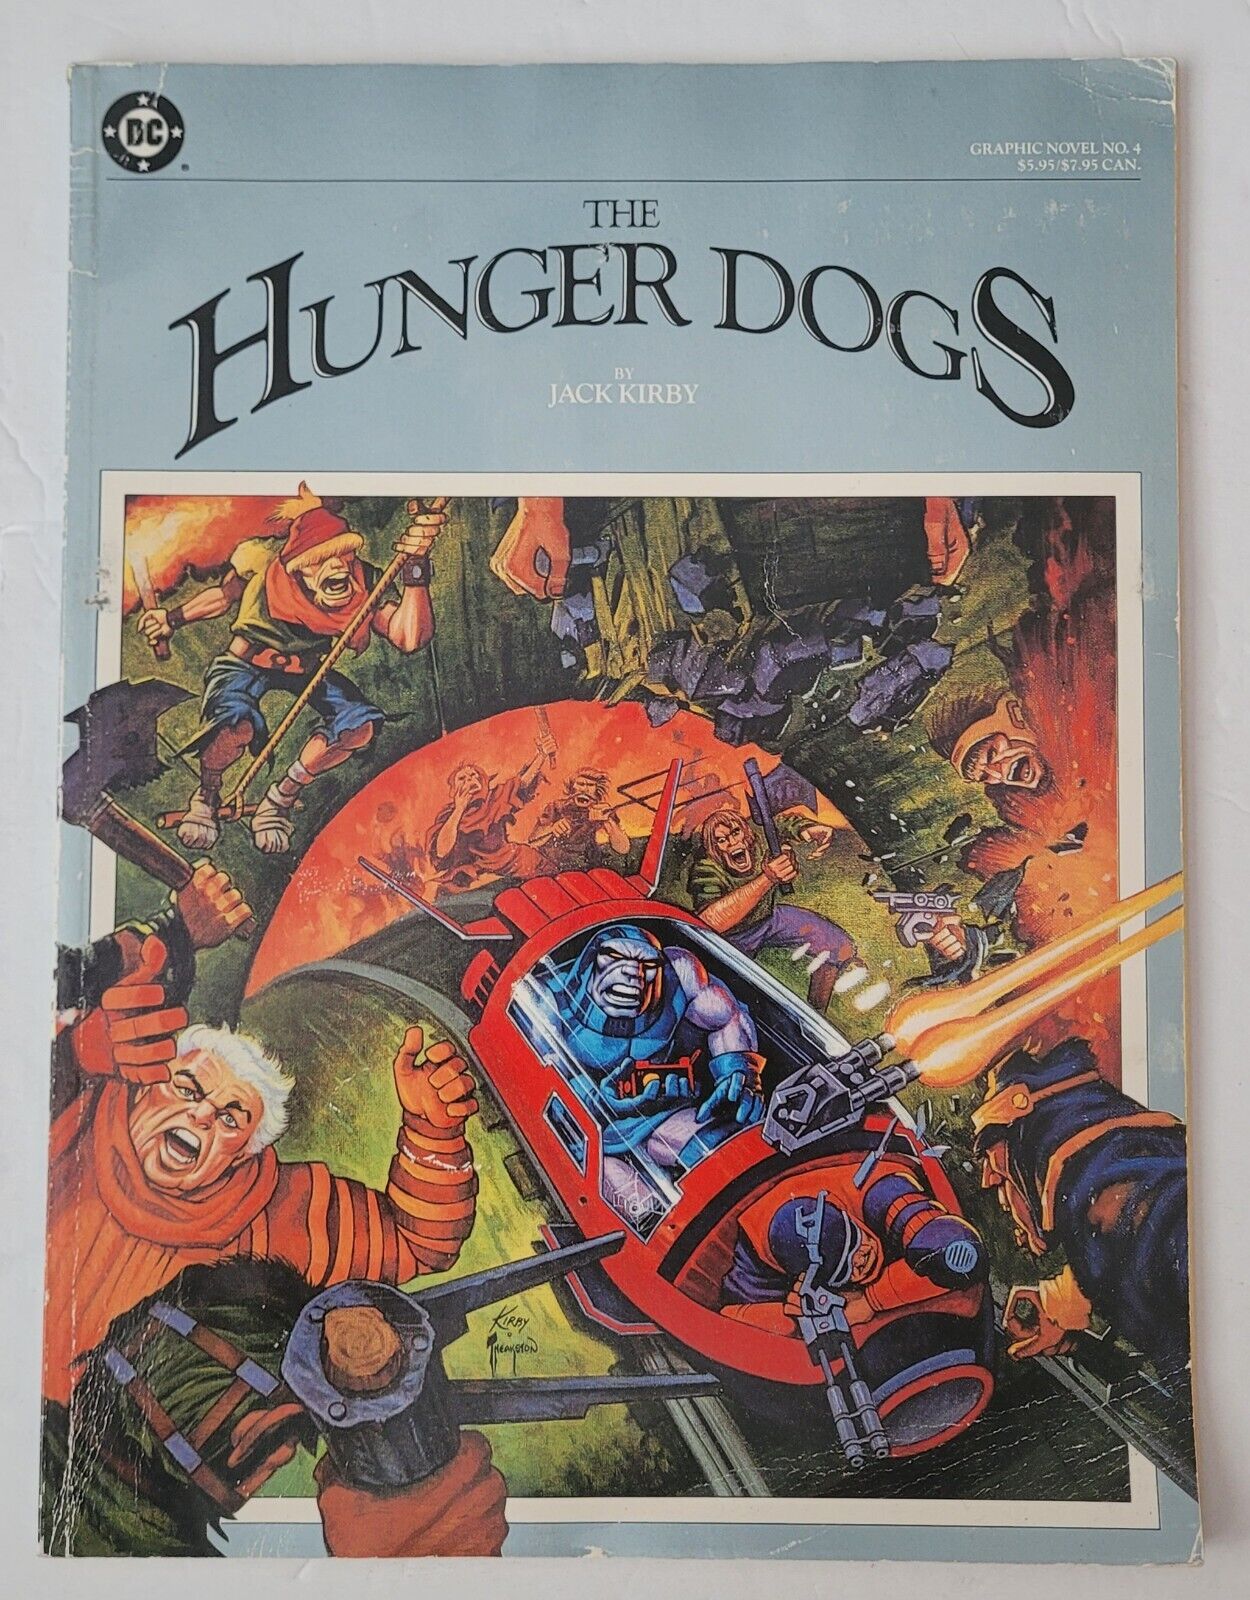 1985 DC Graphic Novel #4 THE HUNGER DOGS by Jack Kirby